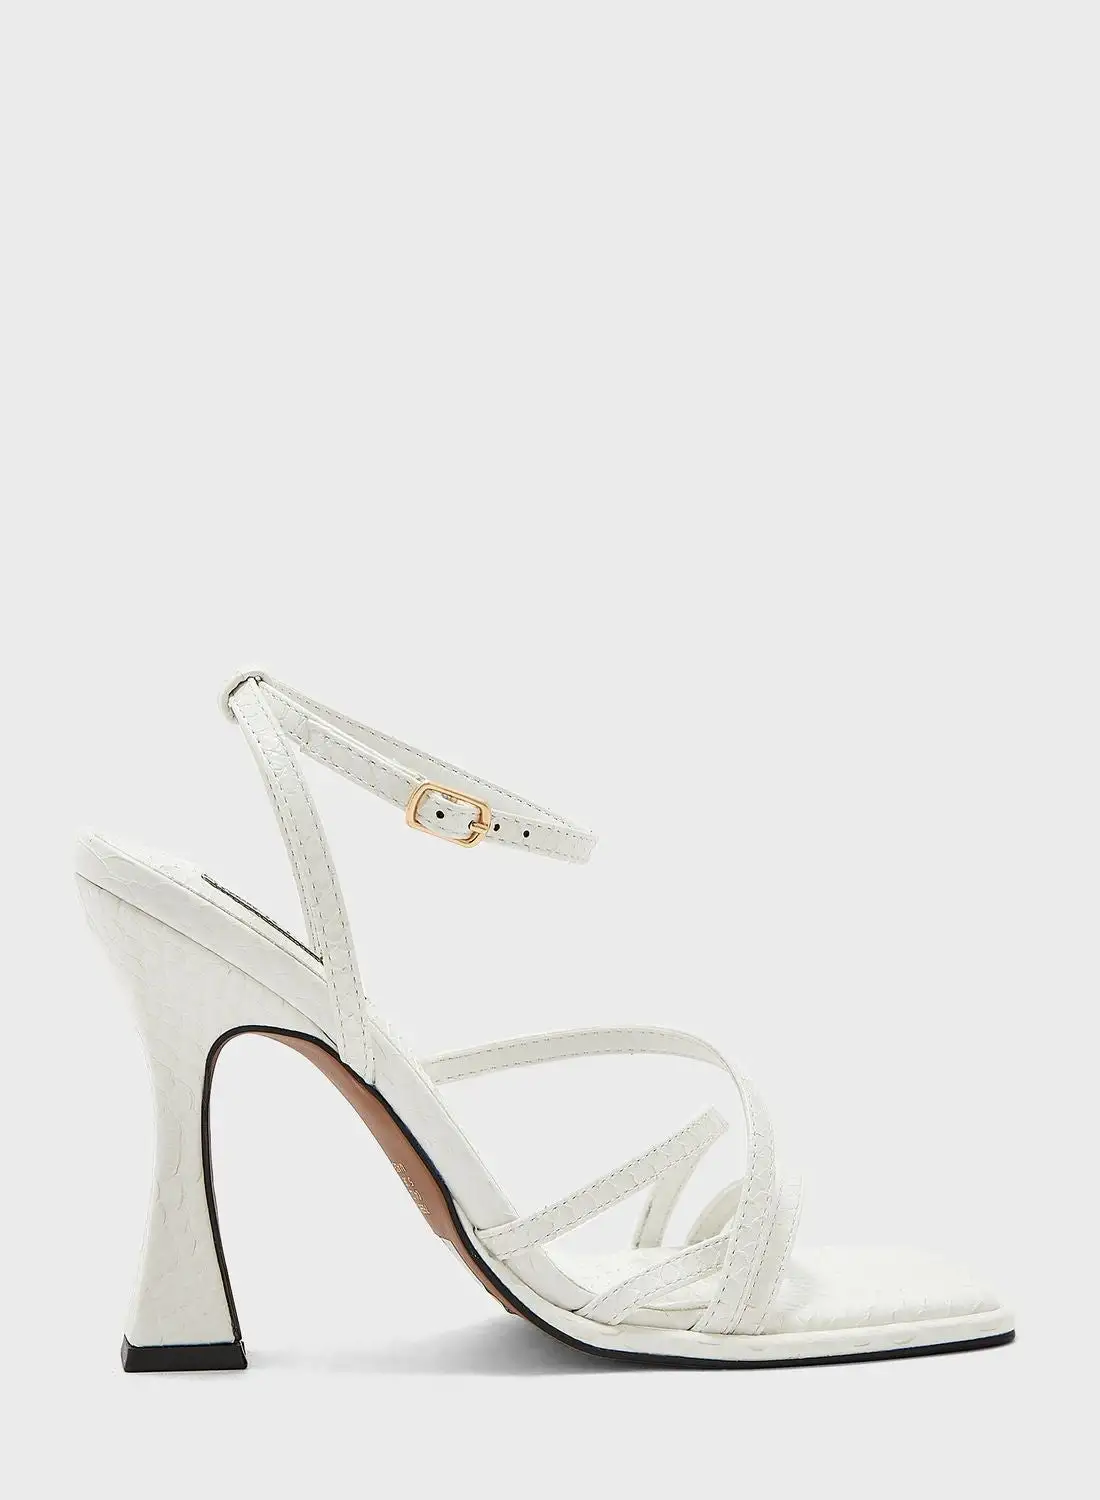 RIVER ISLAND Triple Strap Barely There Sandals